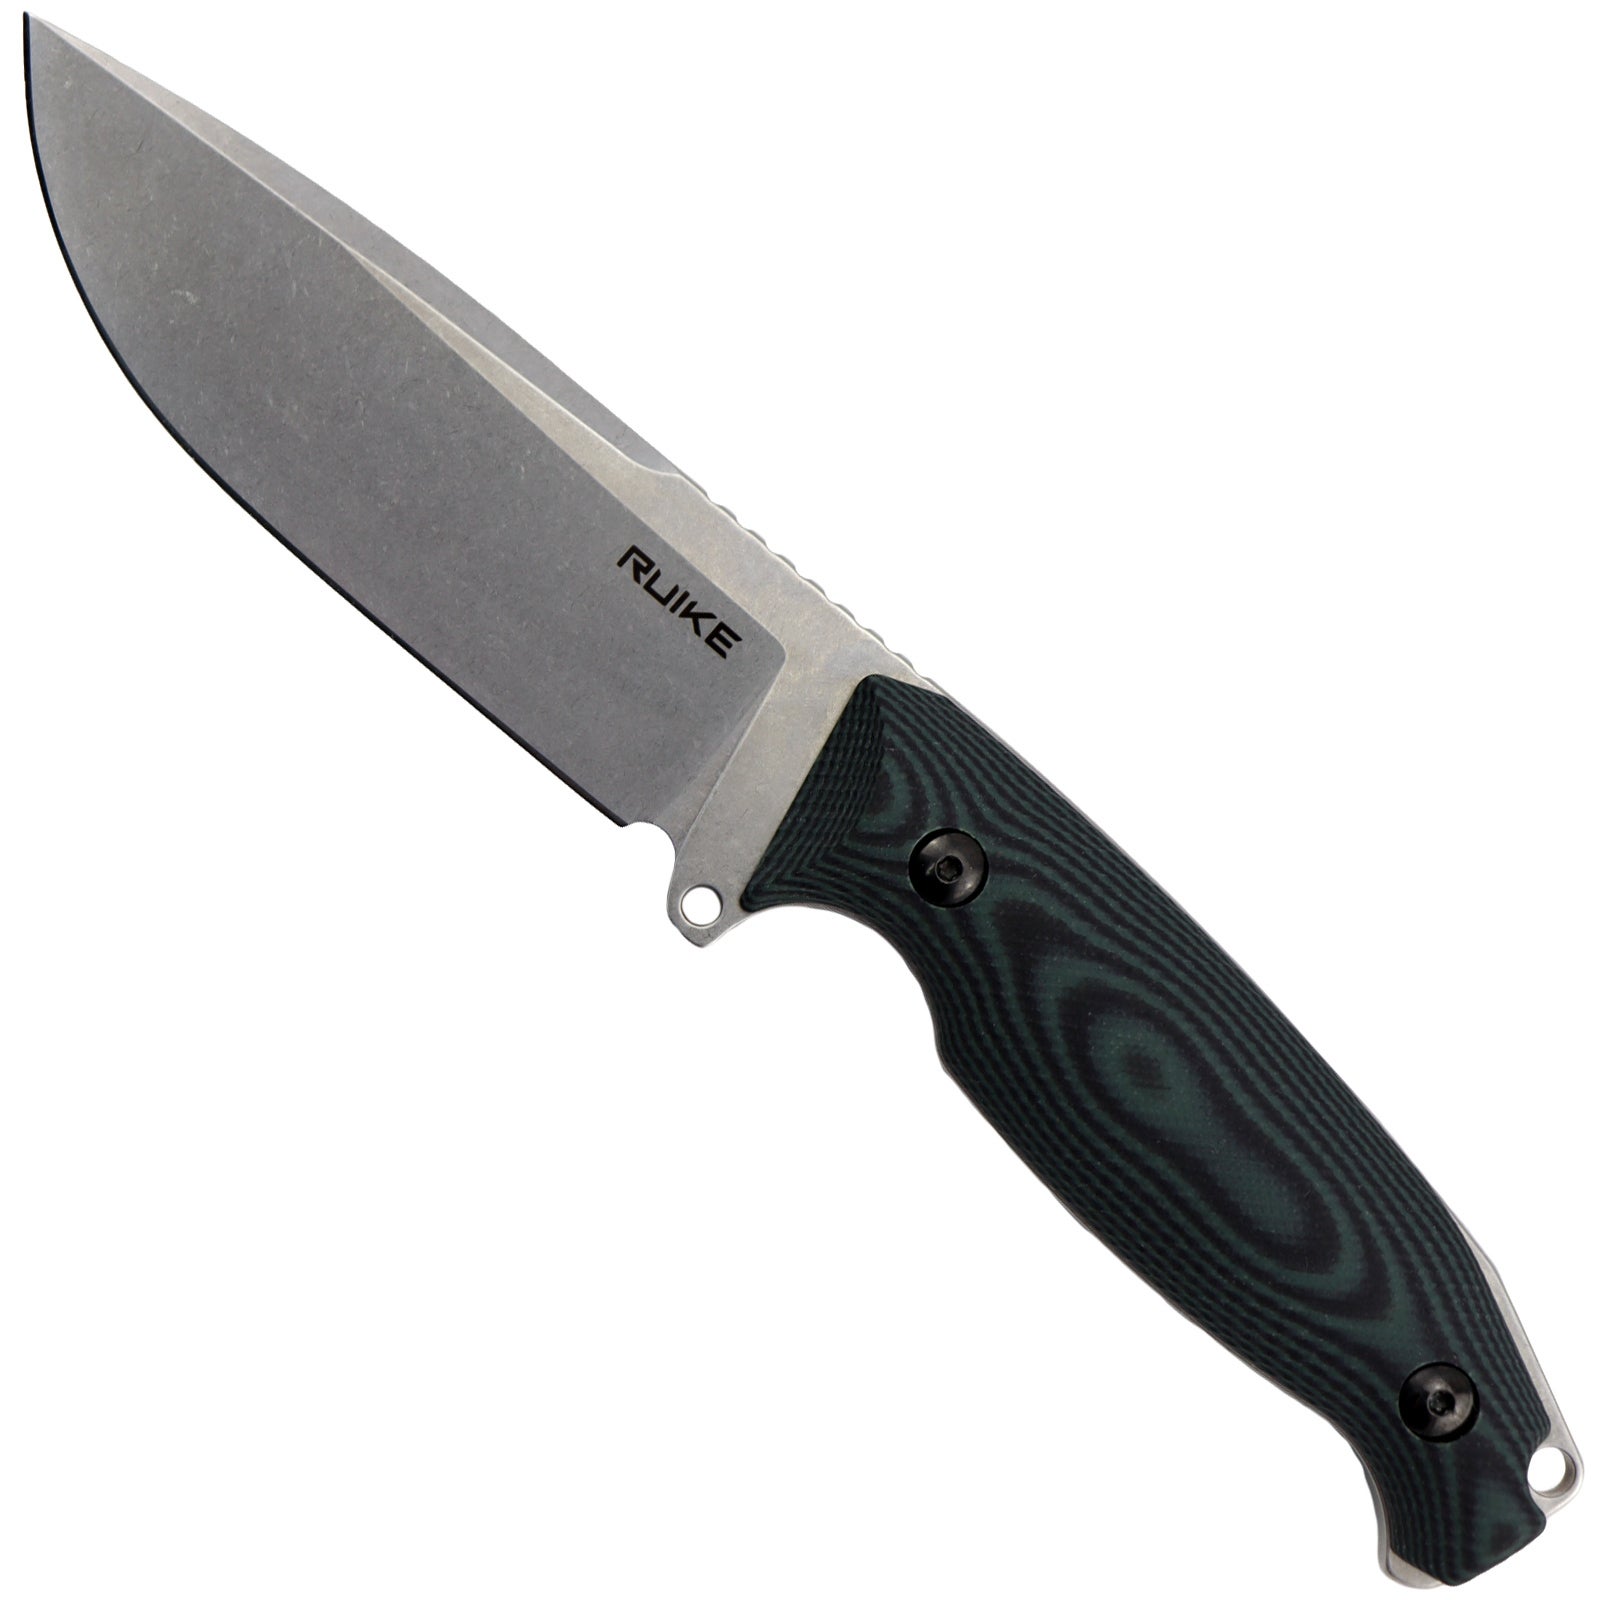 Ruike Knives Jager Fixed Blade Knife - Green / Silver